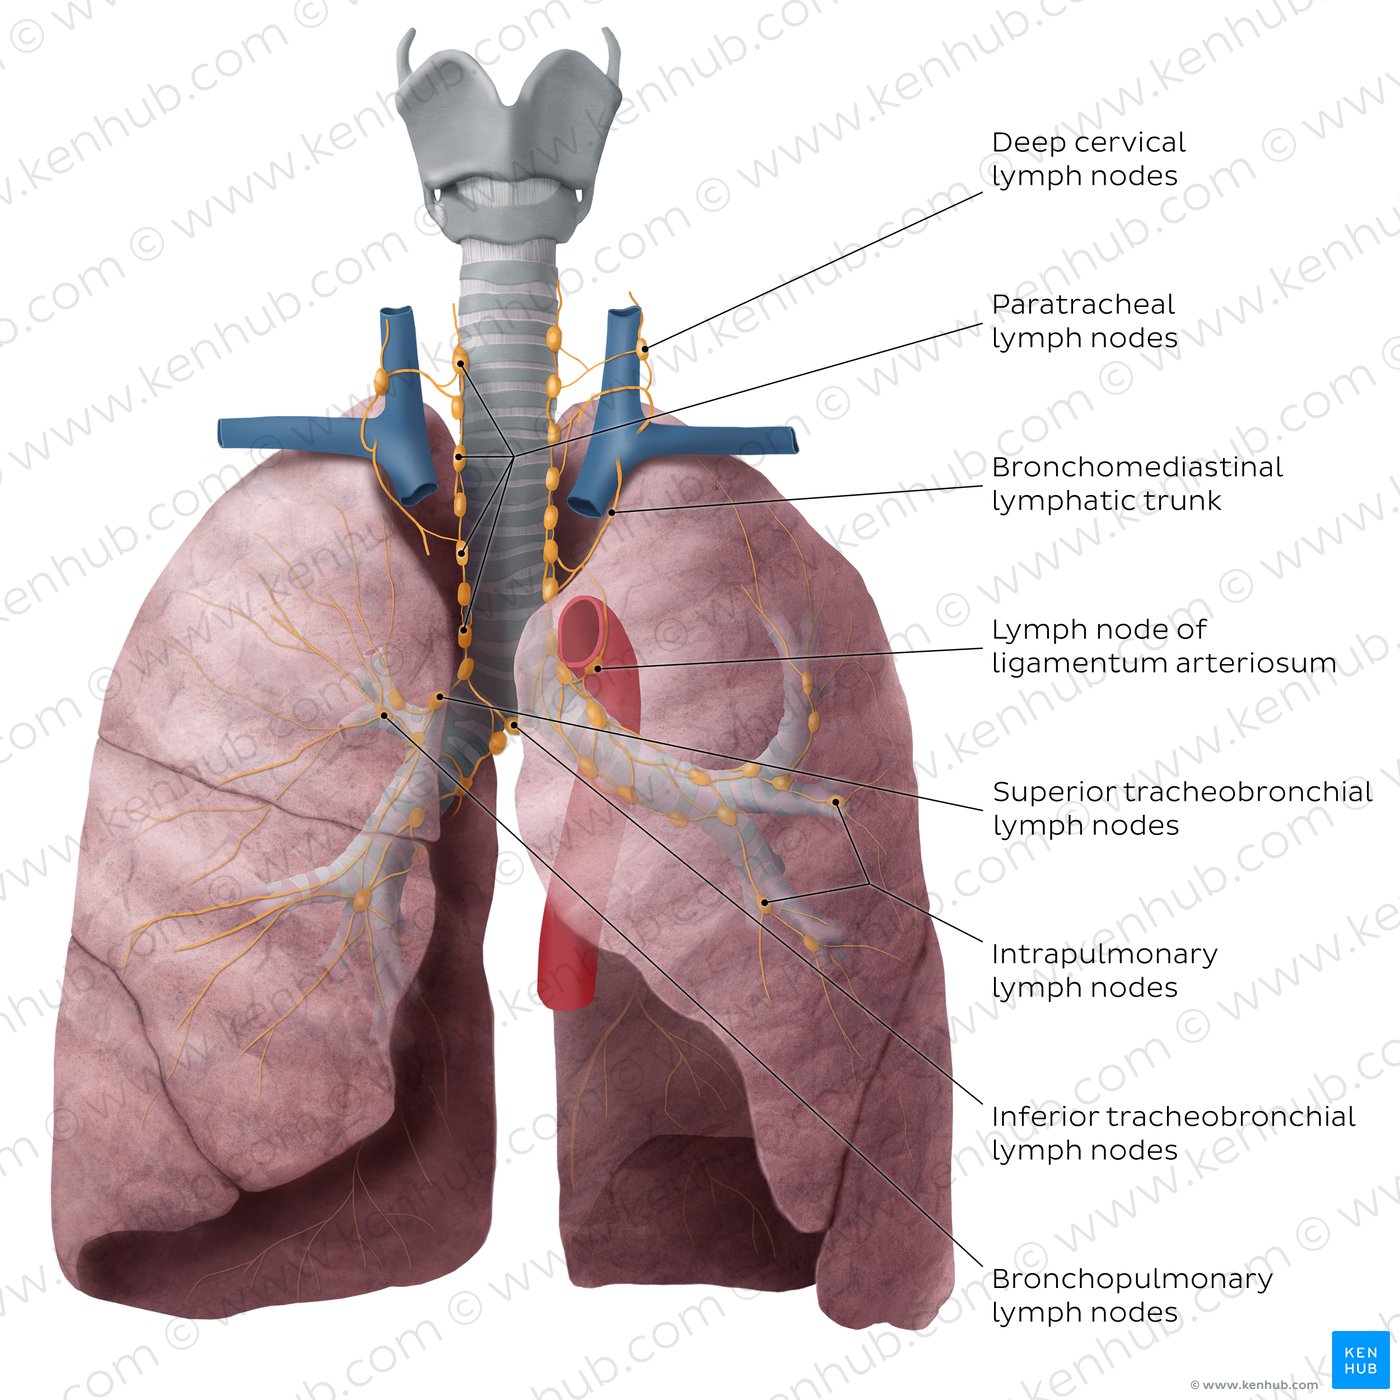 Overview of lymph nodes of the lung (anterior view)